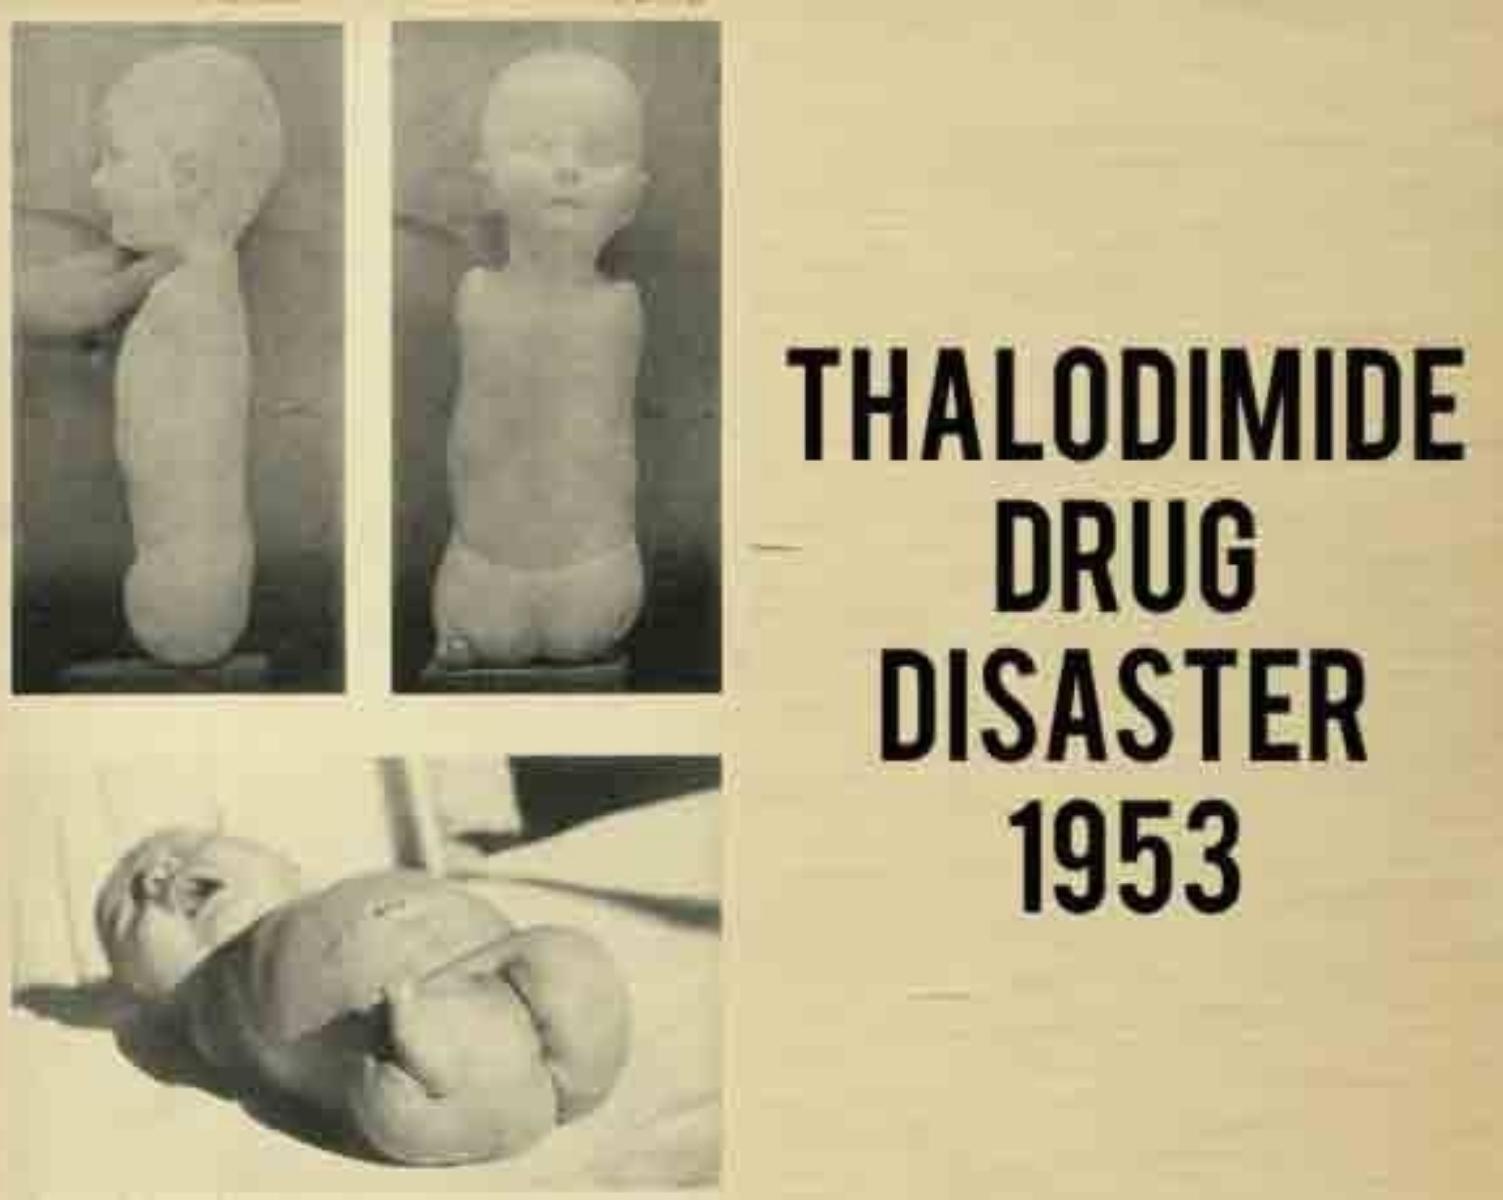 Thalidomide: The Tragedy of Birth Defects & the Treatment